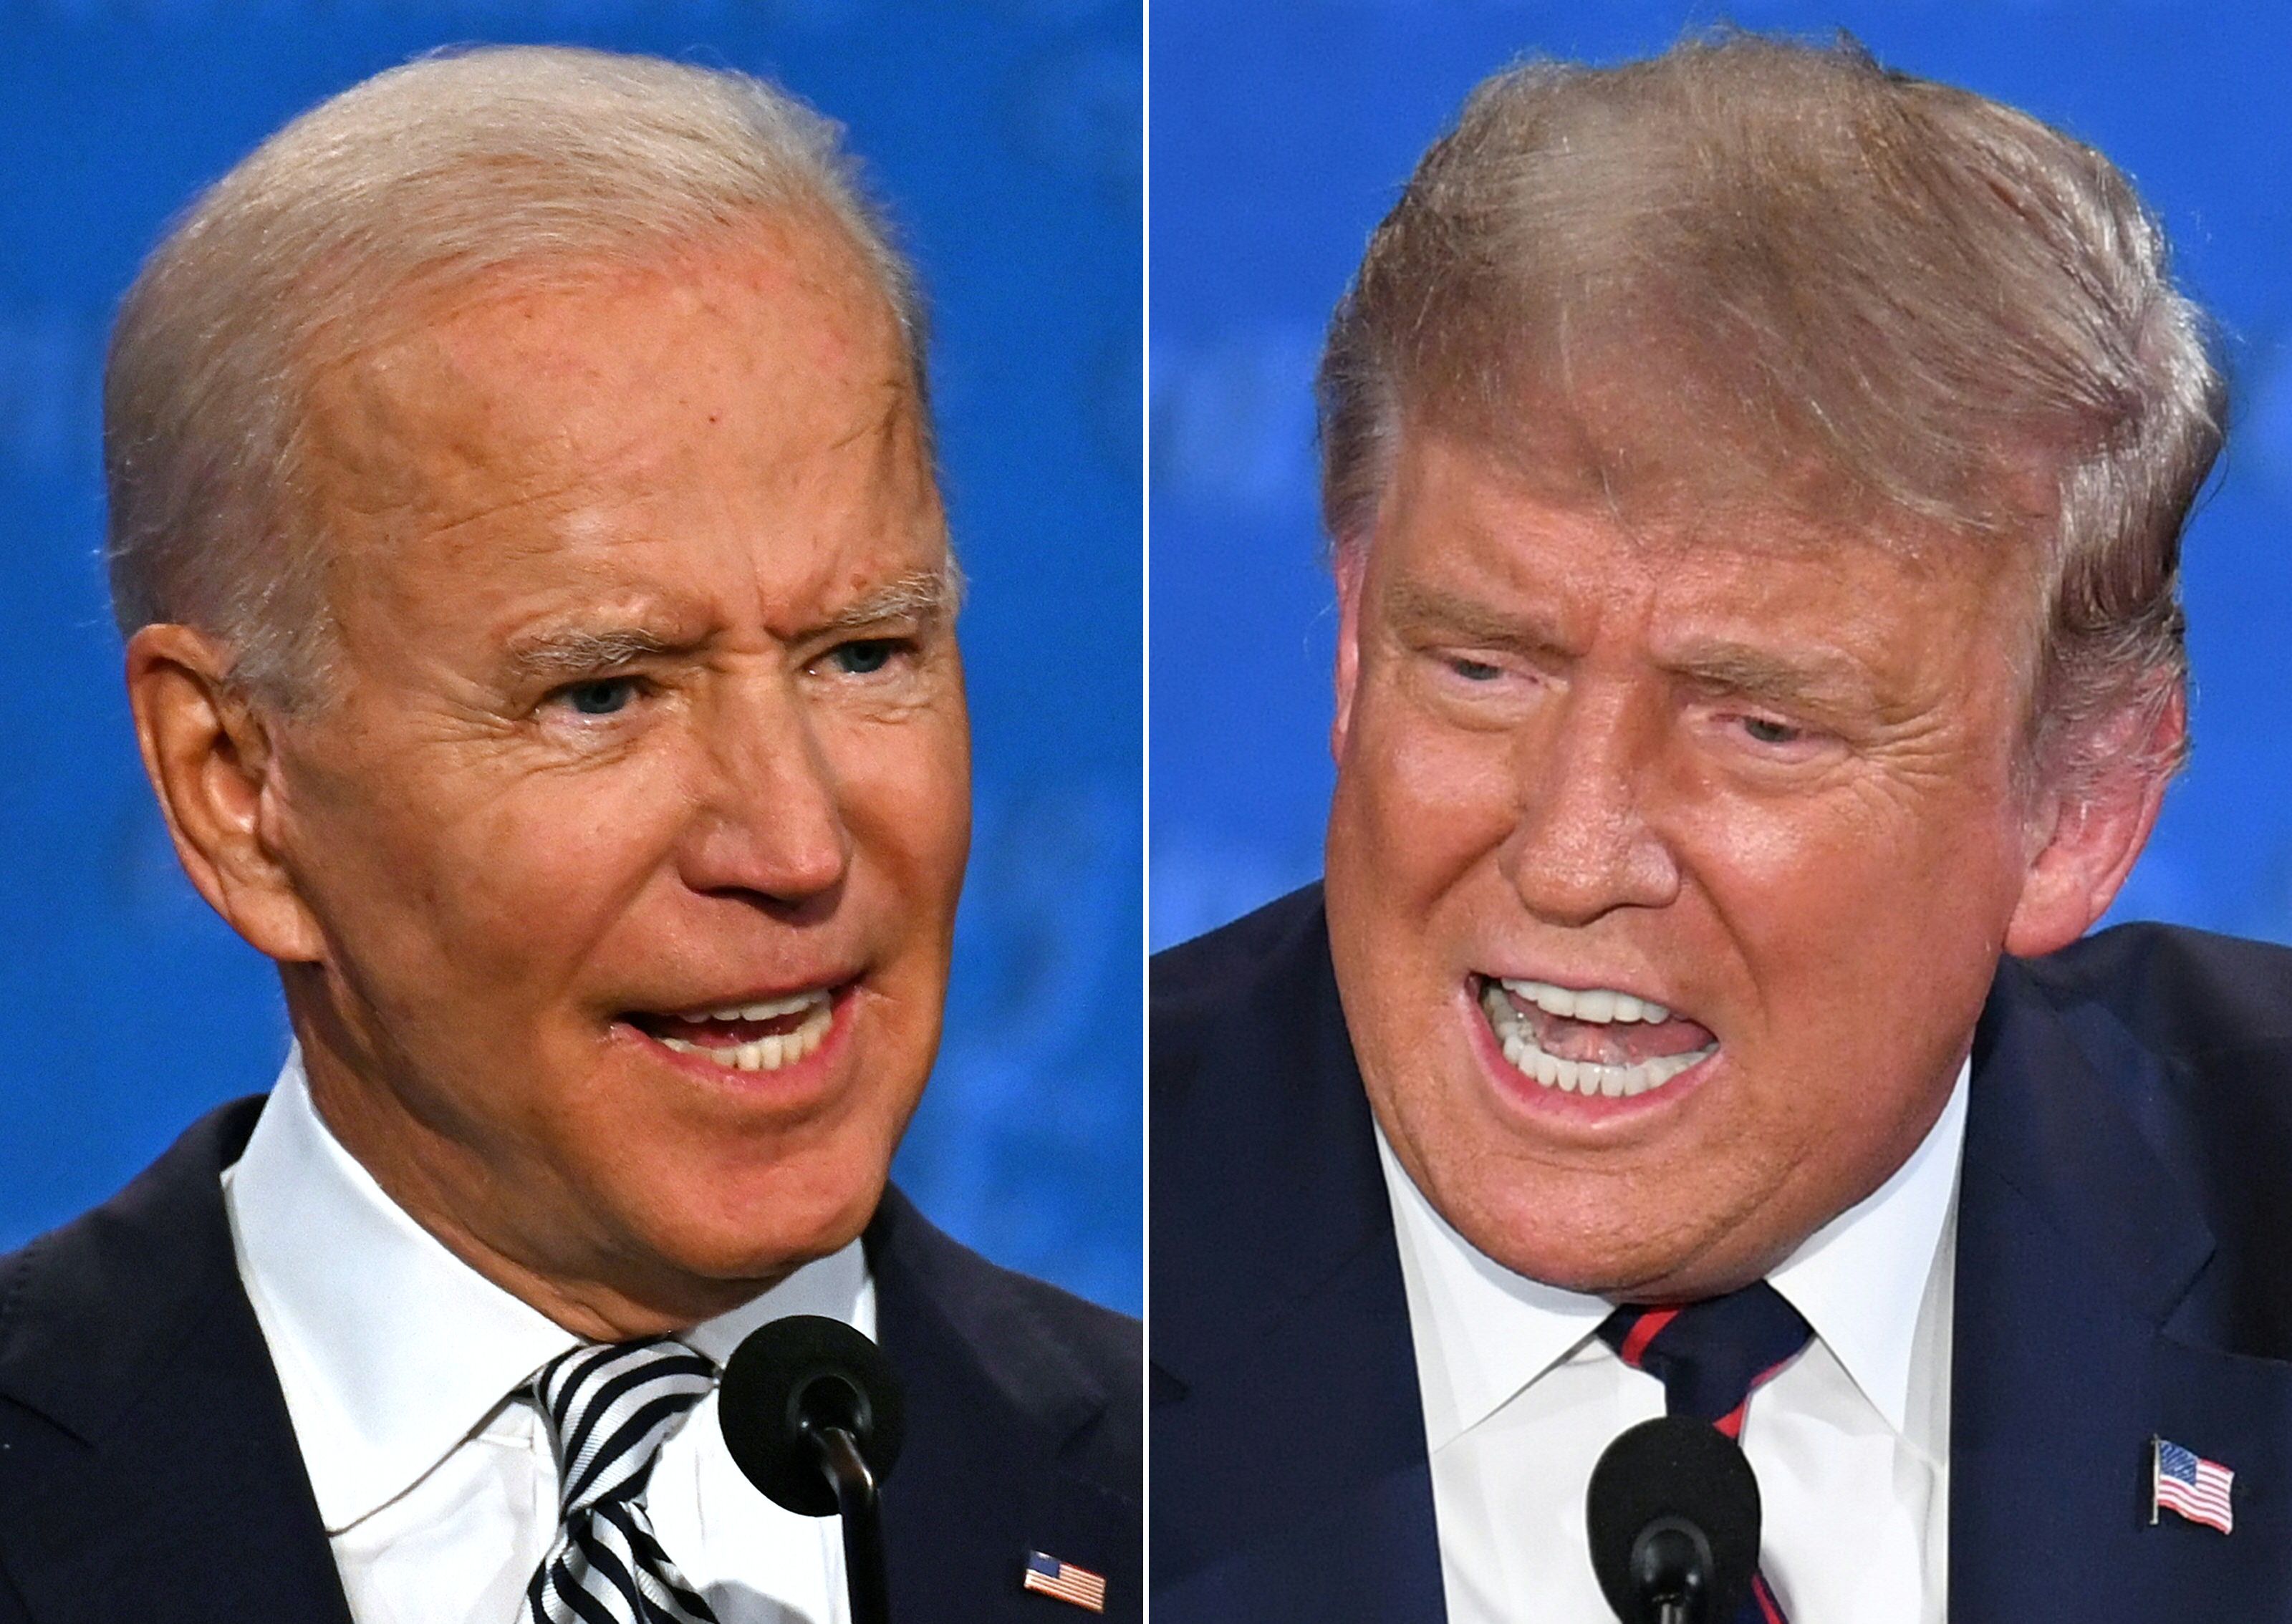 Composite image of Democratic Presidential candidate and former U.S. Vice President Joe Biden (L) and U.S. President Donald Trump speaking during the first presidential debate on September 29, 2020